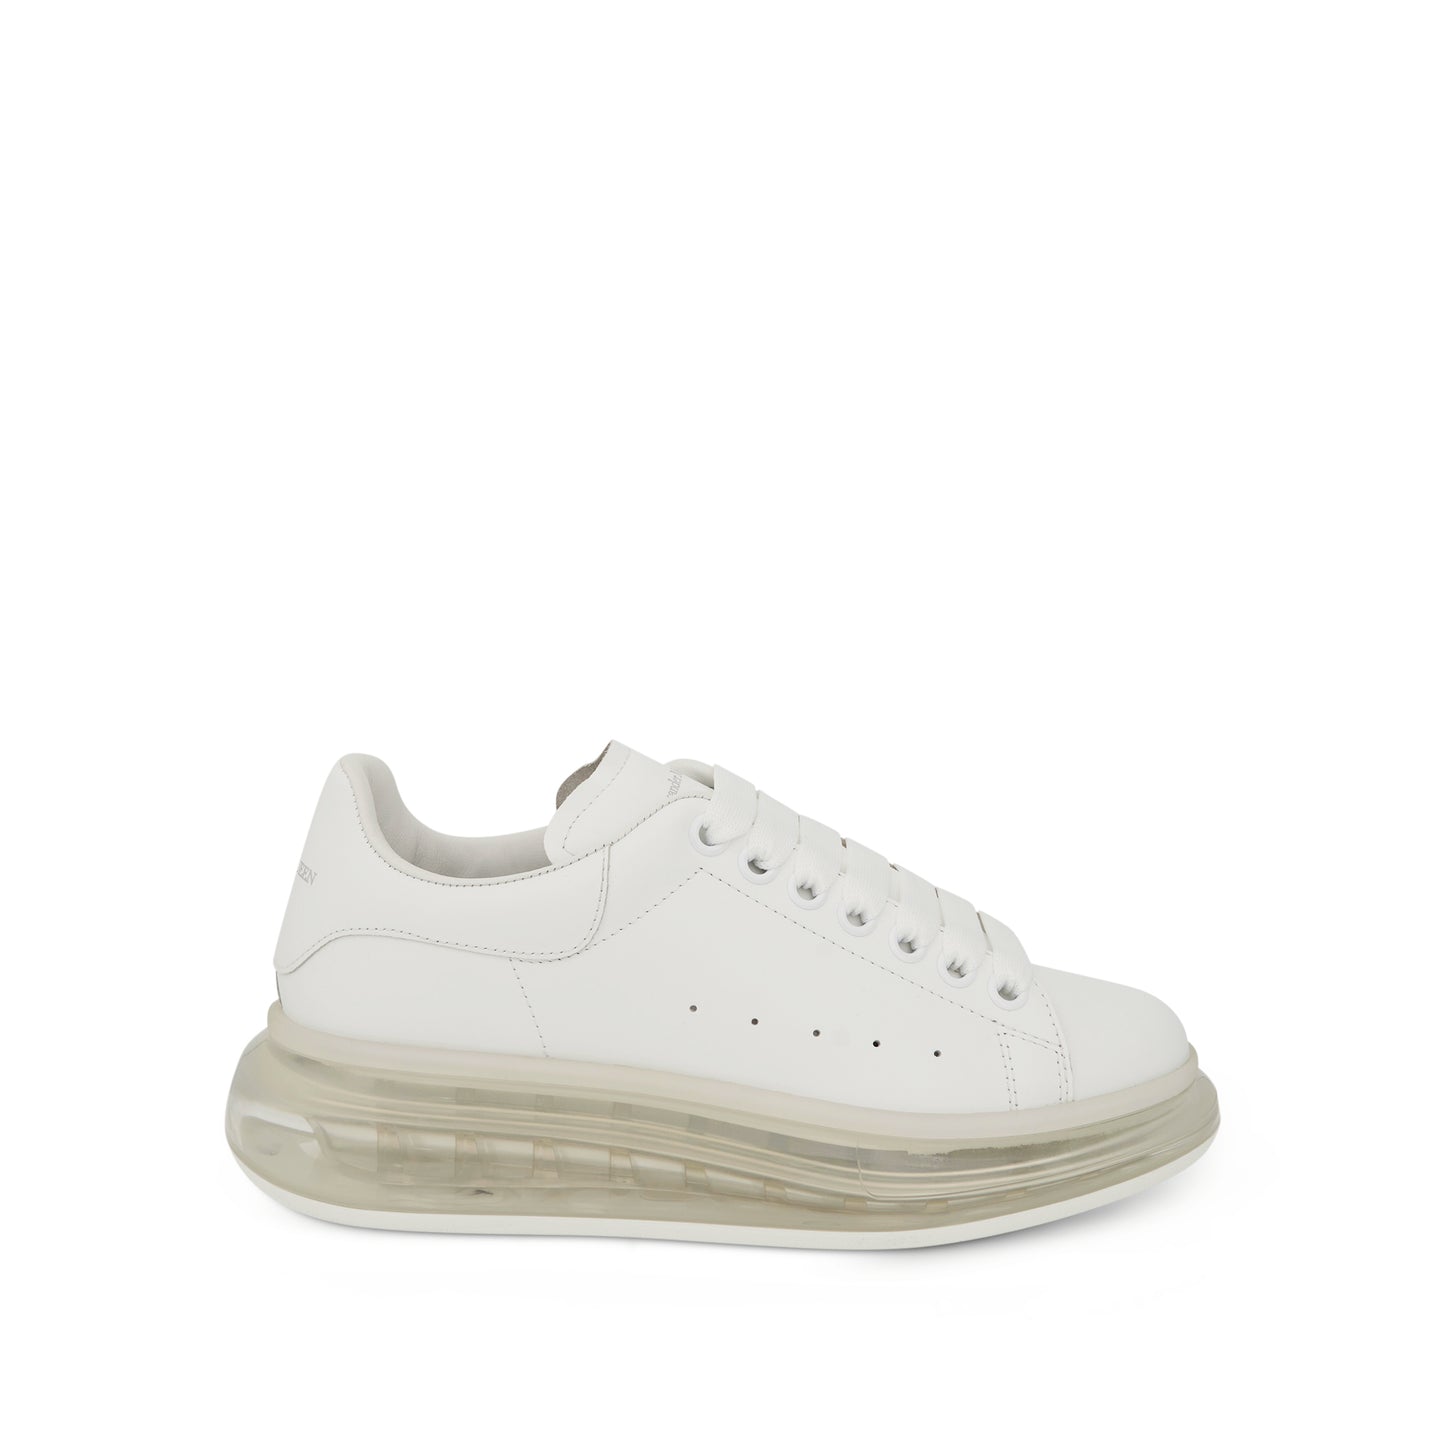 Larry Transparent Sole Sneakers in White/White